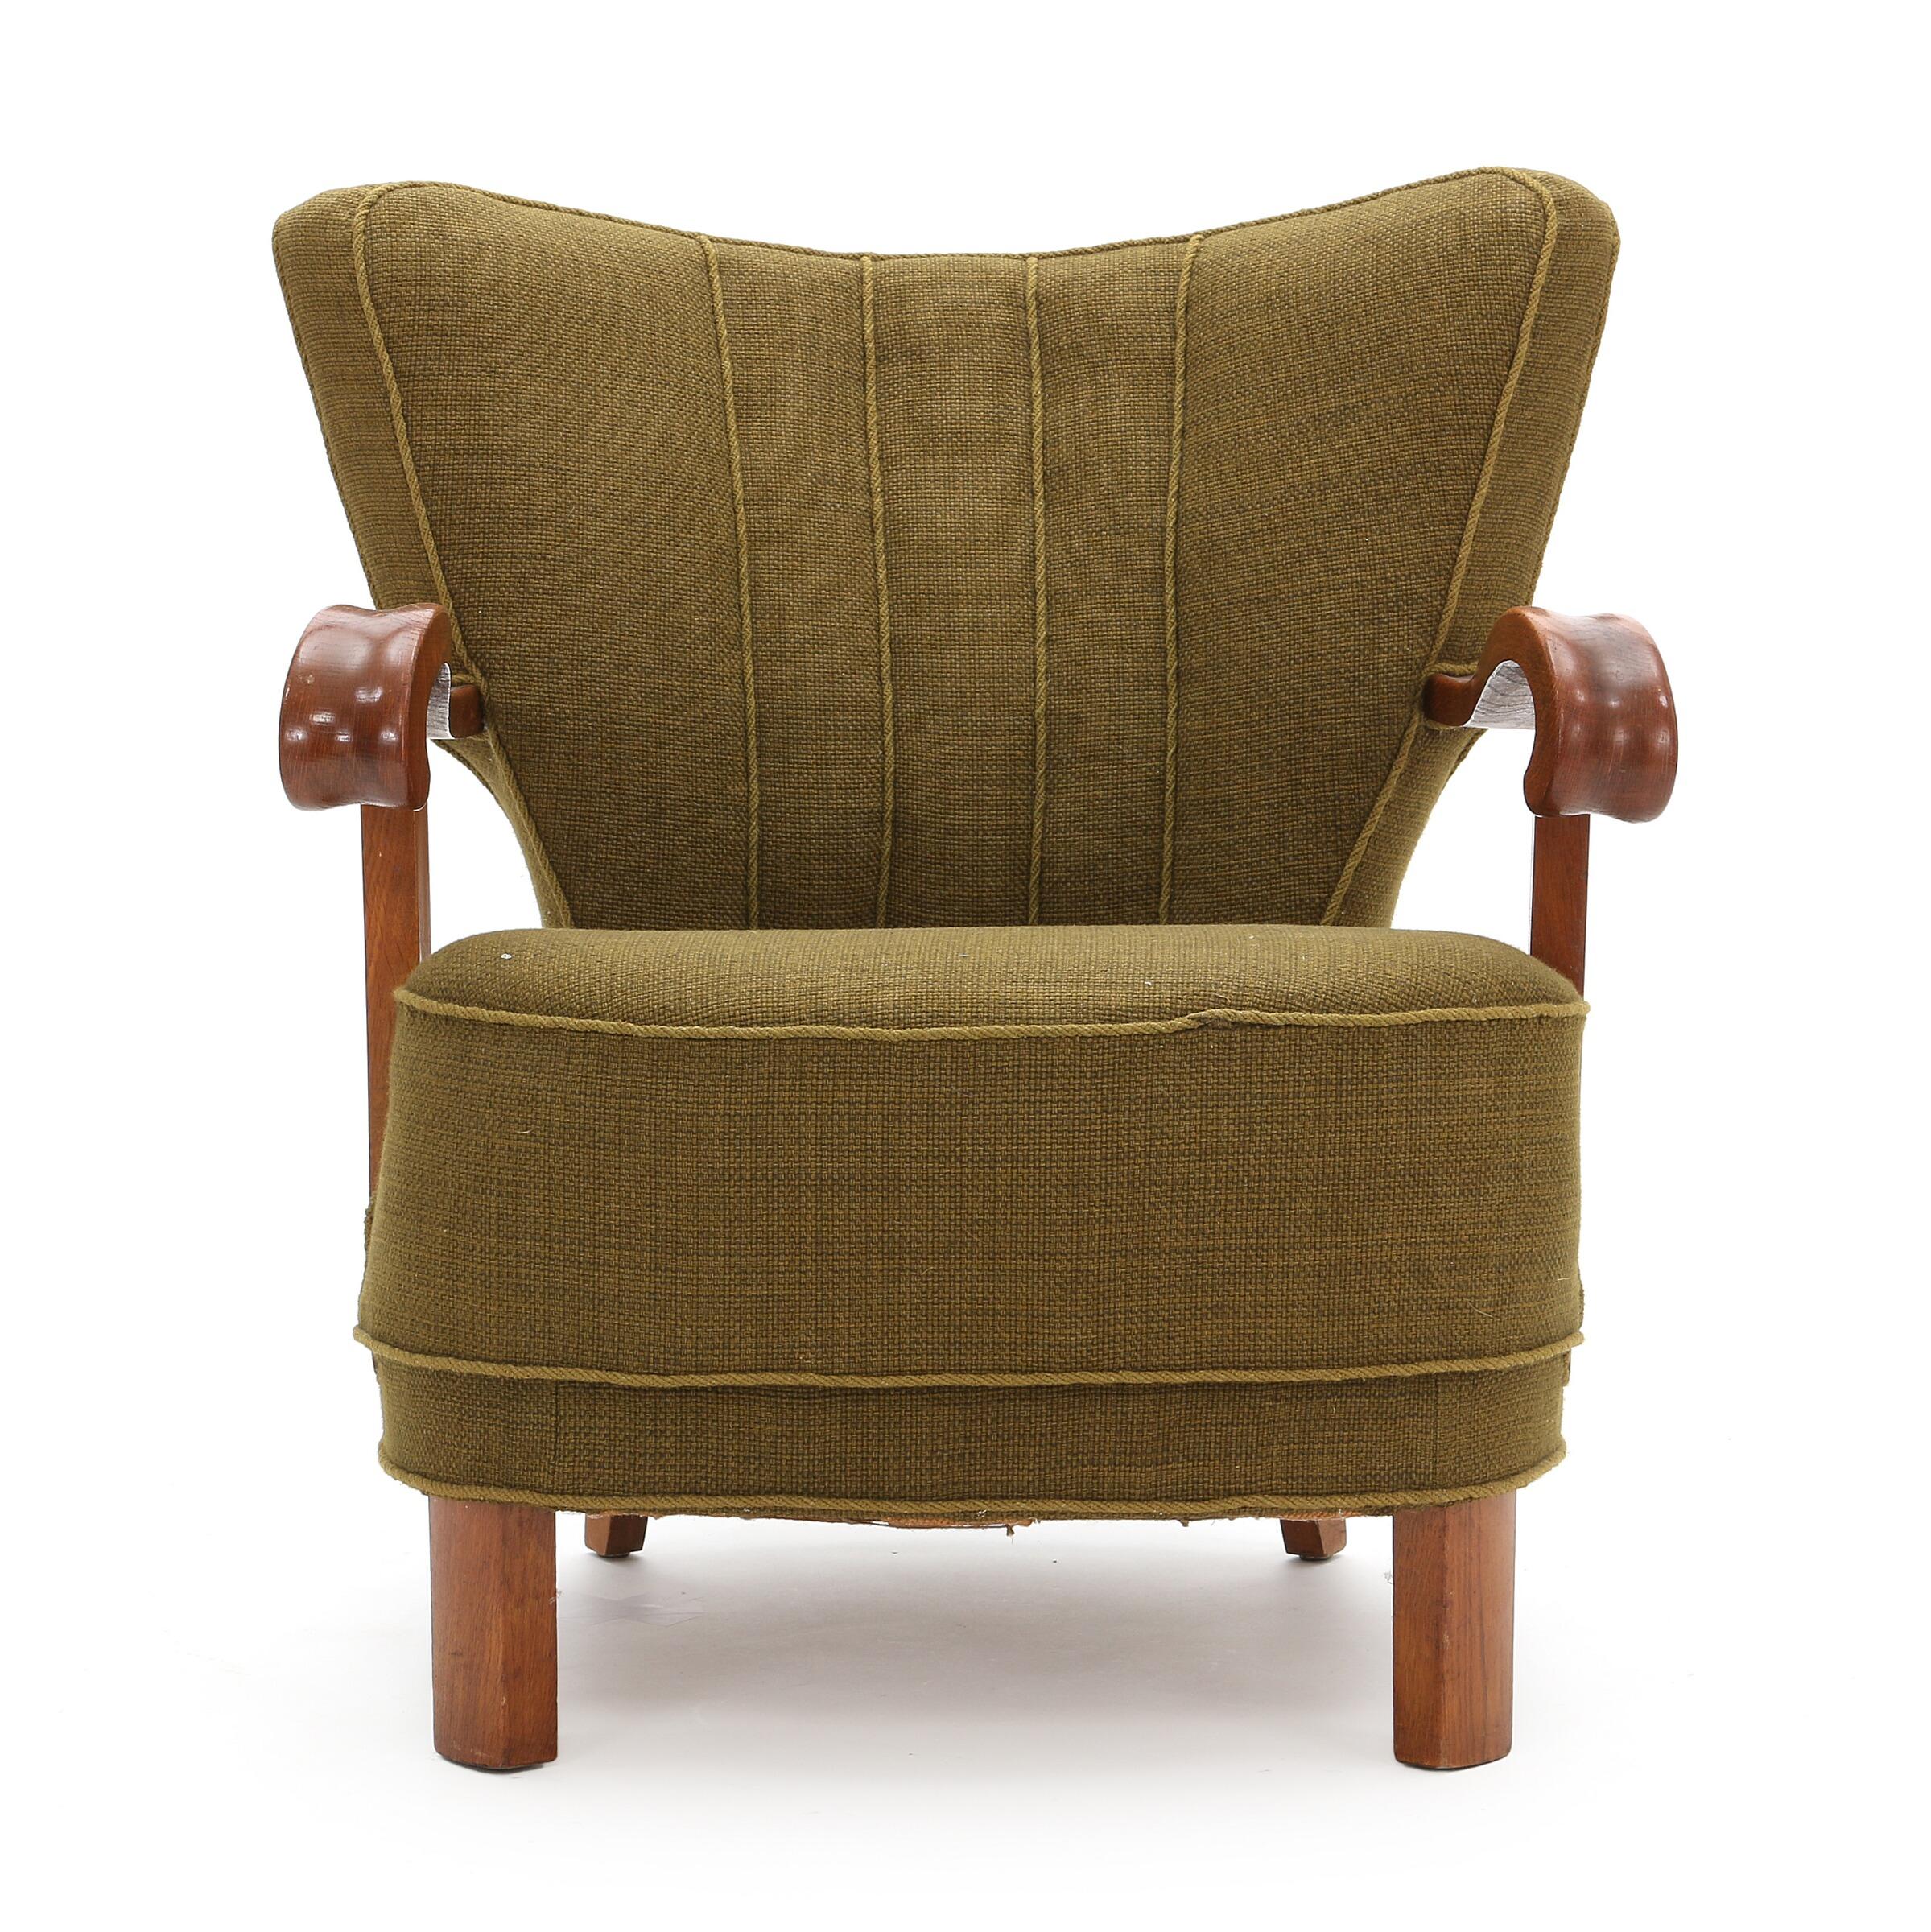 Substantial Danish Modern armchair in oak, back legs of stained beech. Seat and back upholstered with green wool. Made 1940s. Great form and very comfortable.